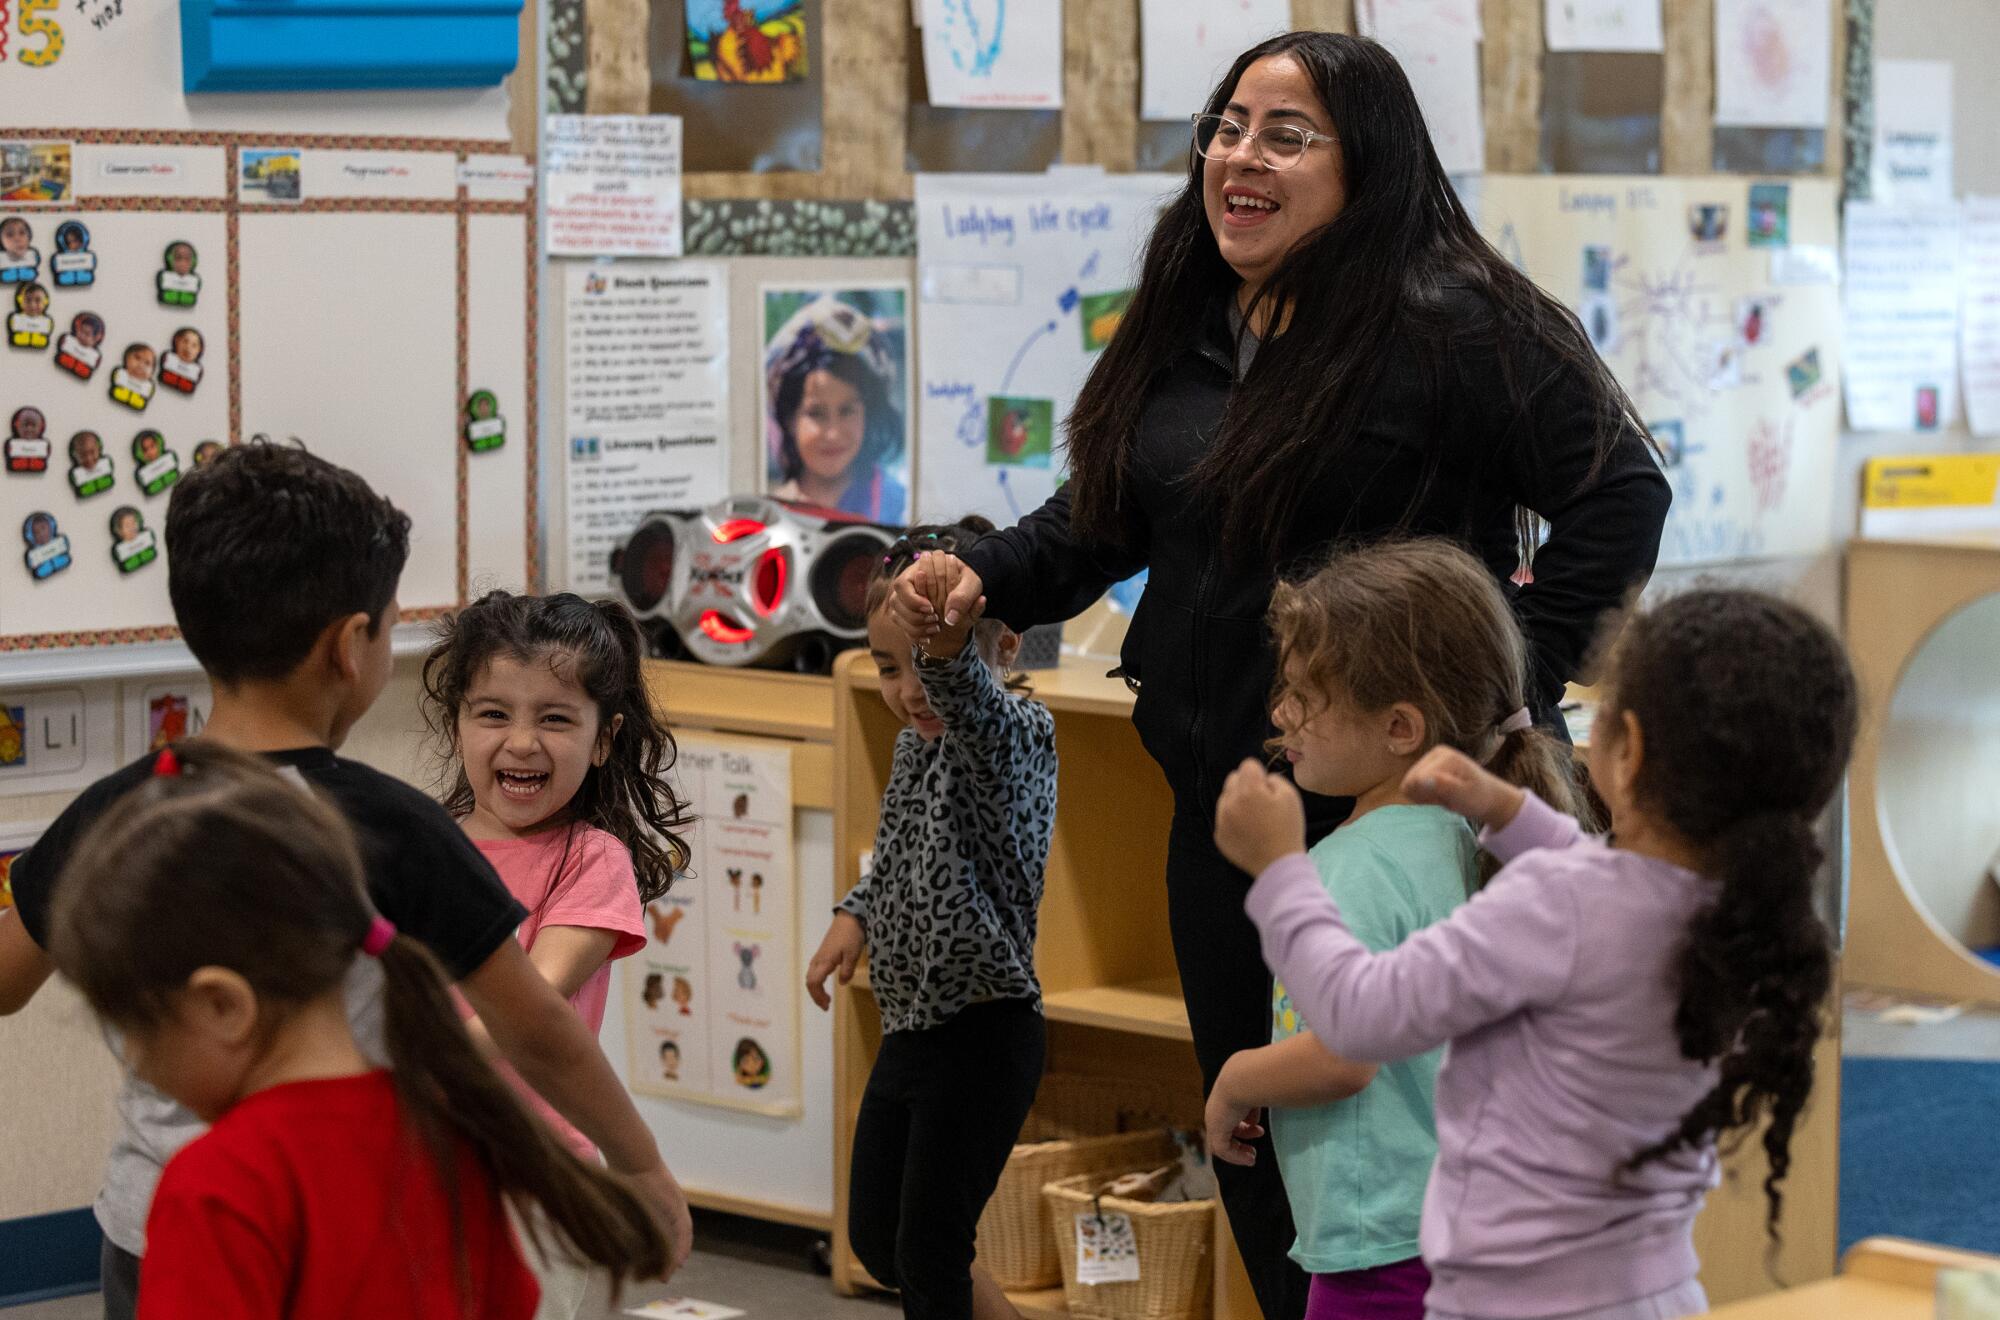 A woman dances with young children in a classroom.